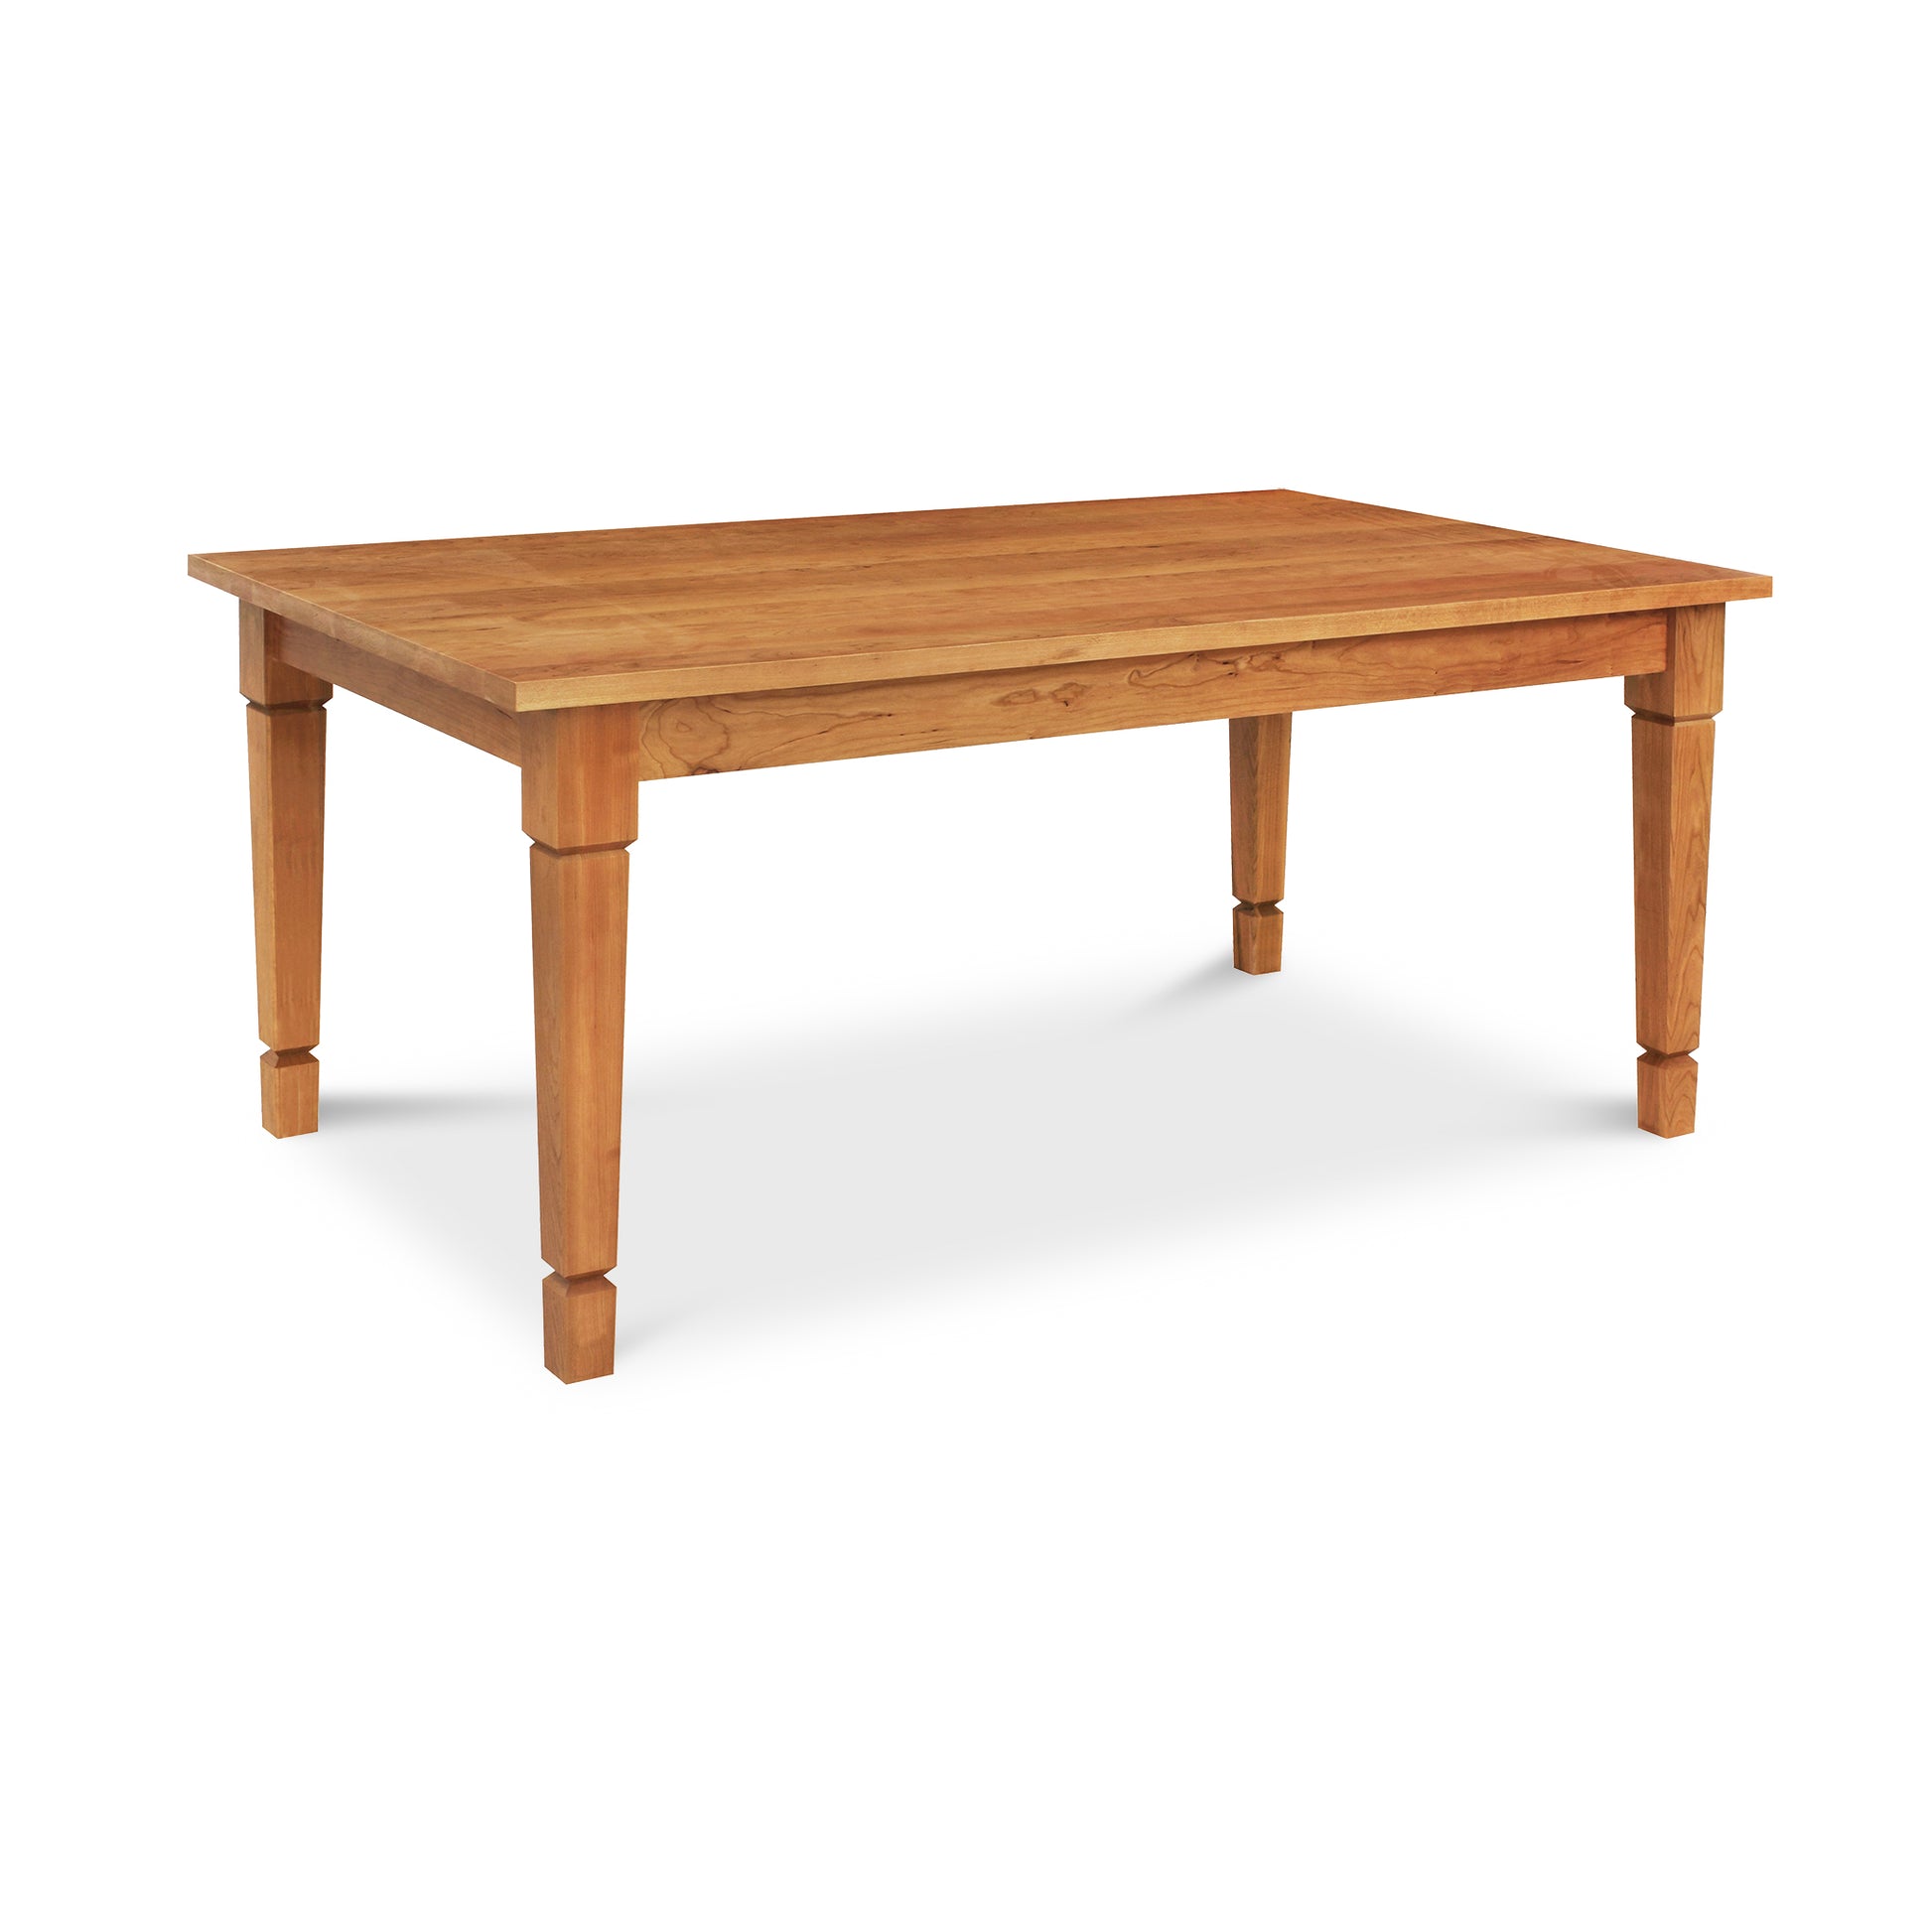 A Lyndon Furniture American Craftsman solid top dining table made from sustainably sourced hardwoods, placed on a white background.